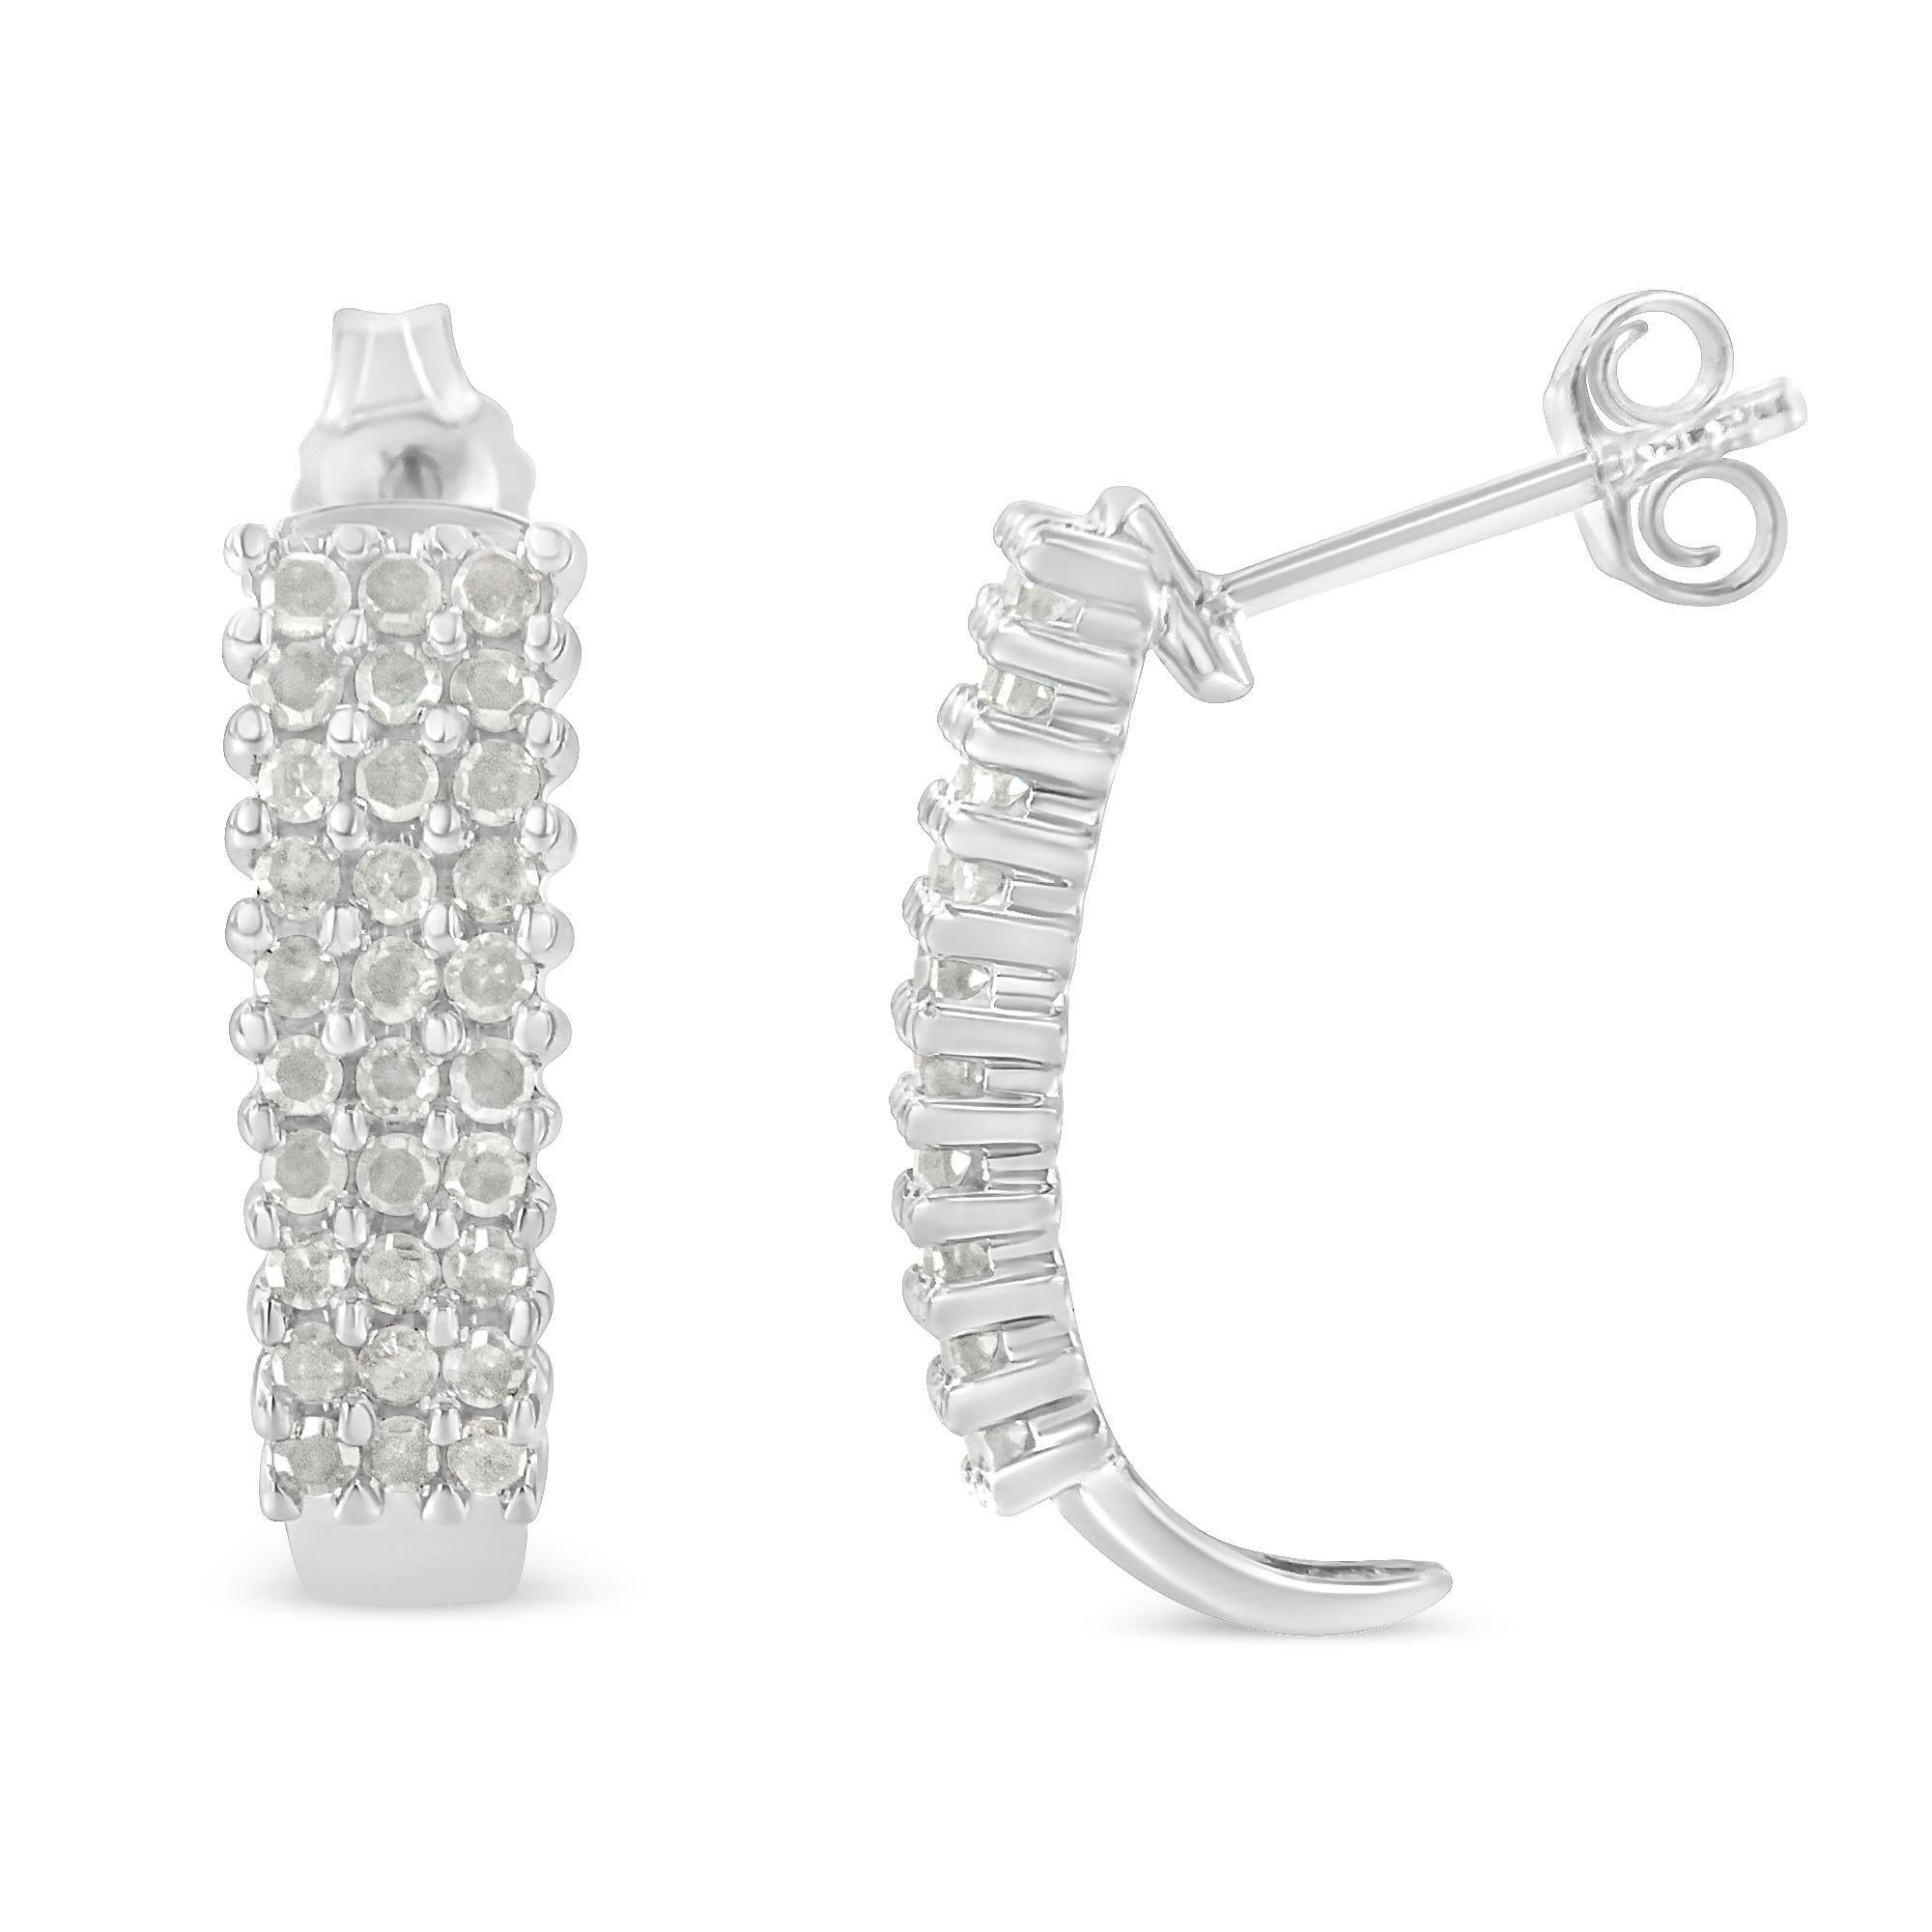 Accent your ears with these sterling silver J-hoop earrings. Representing an extreme luminosity, the hoop earrings are adorned with shimmering rose cut diamonds. The heavily encrusted diamonds in a prong setting adds extraordinary brilliance to this